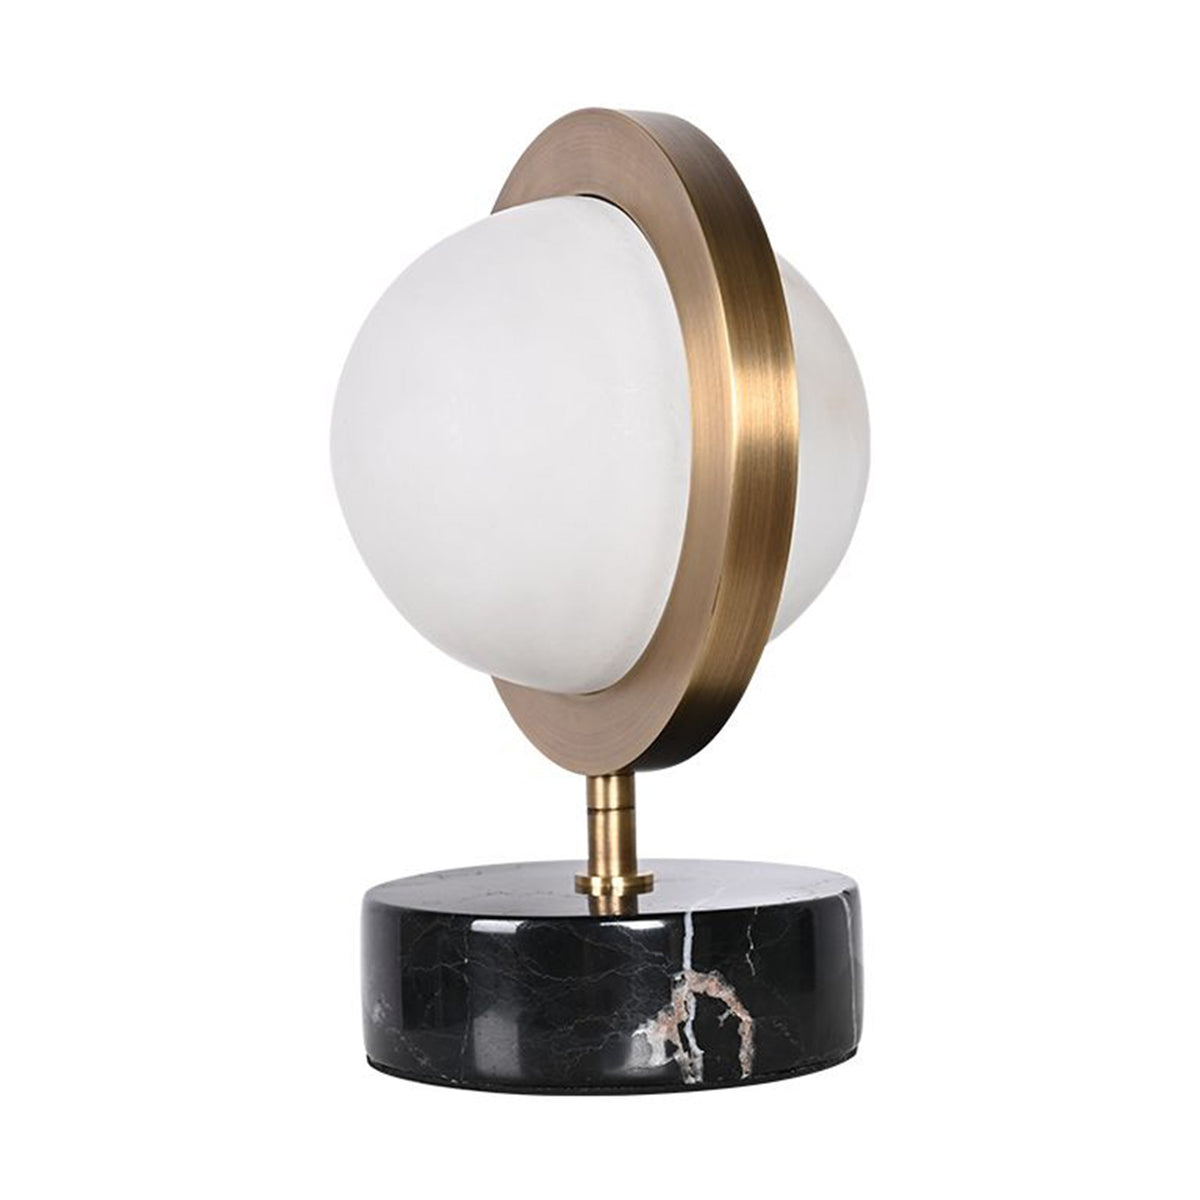 ALABASTER PLANET TABLE LAMP